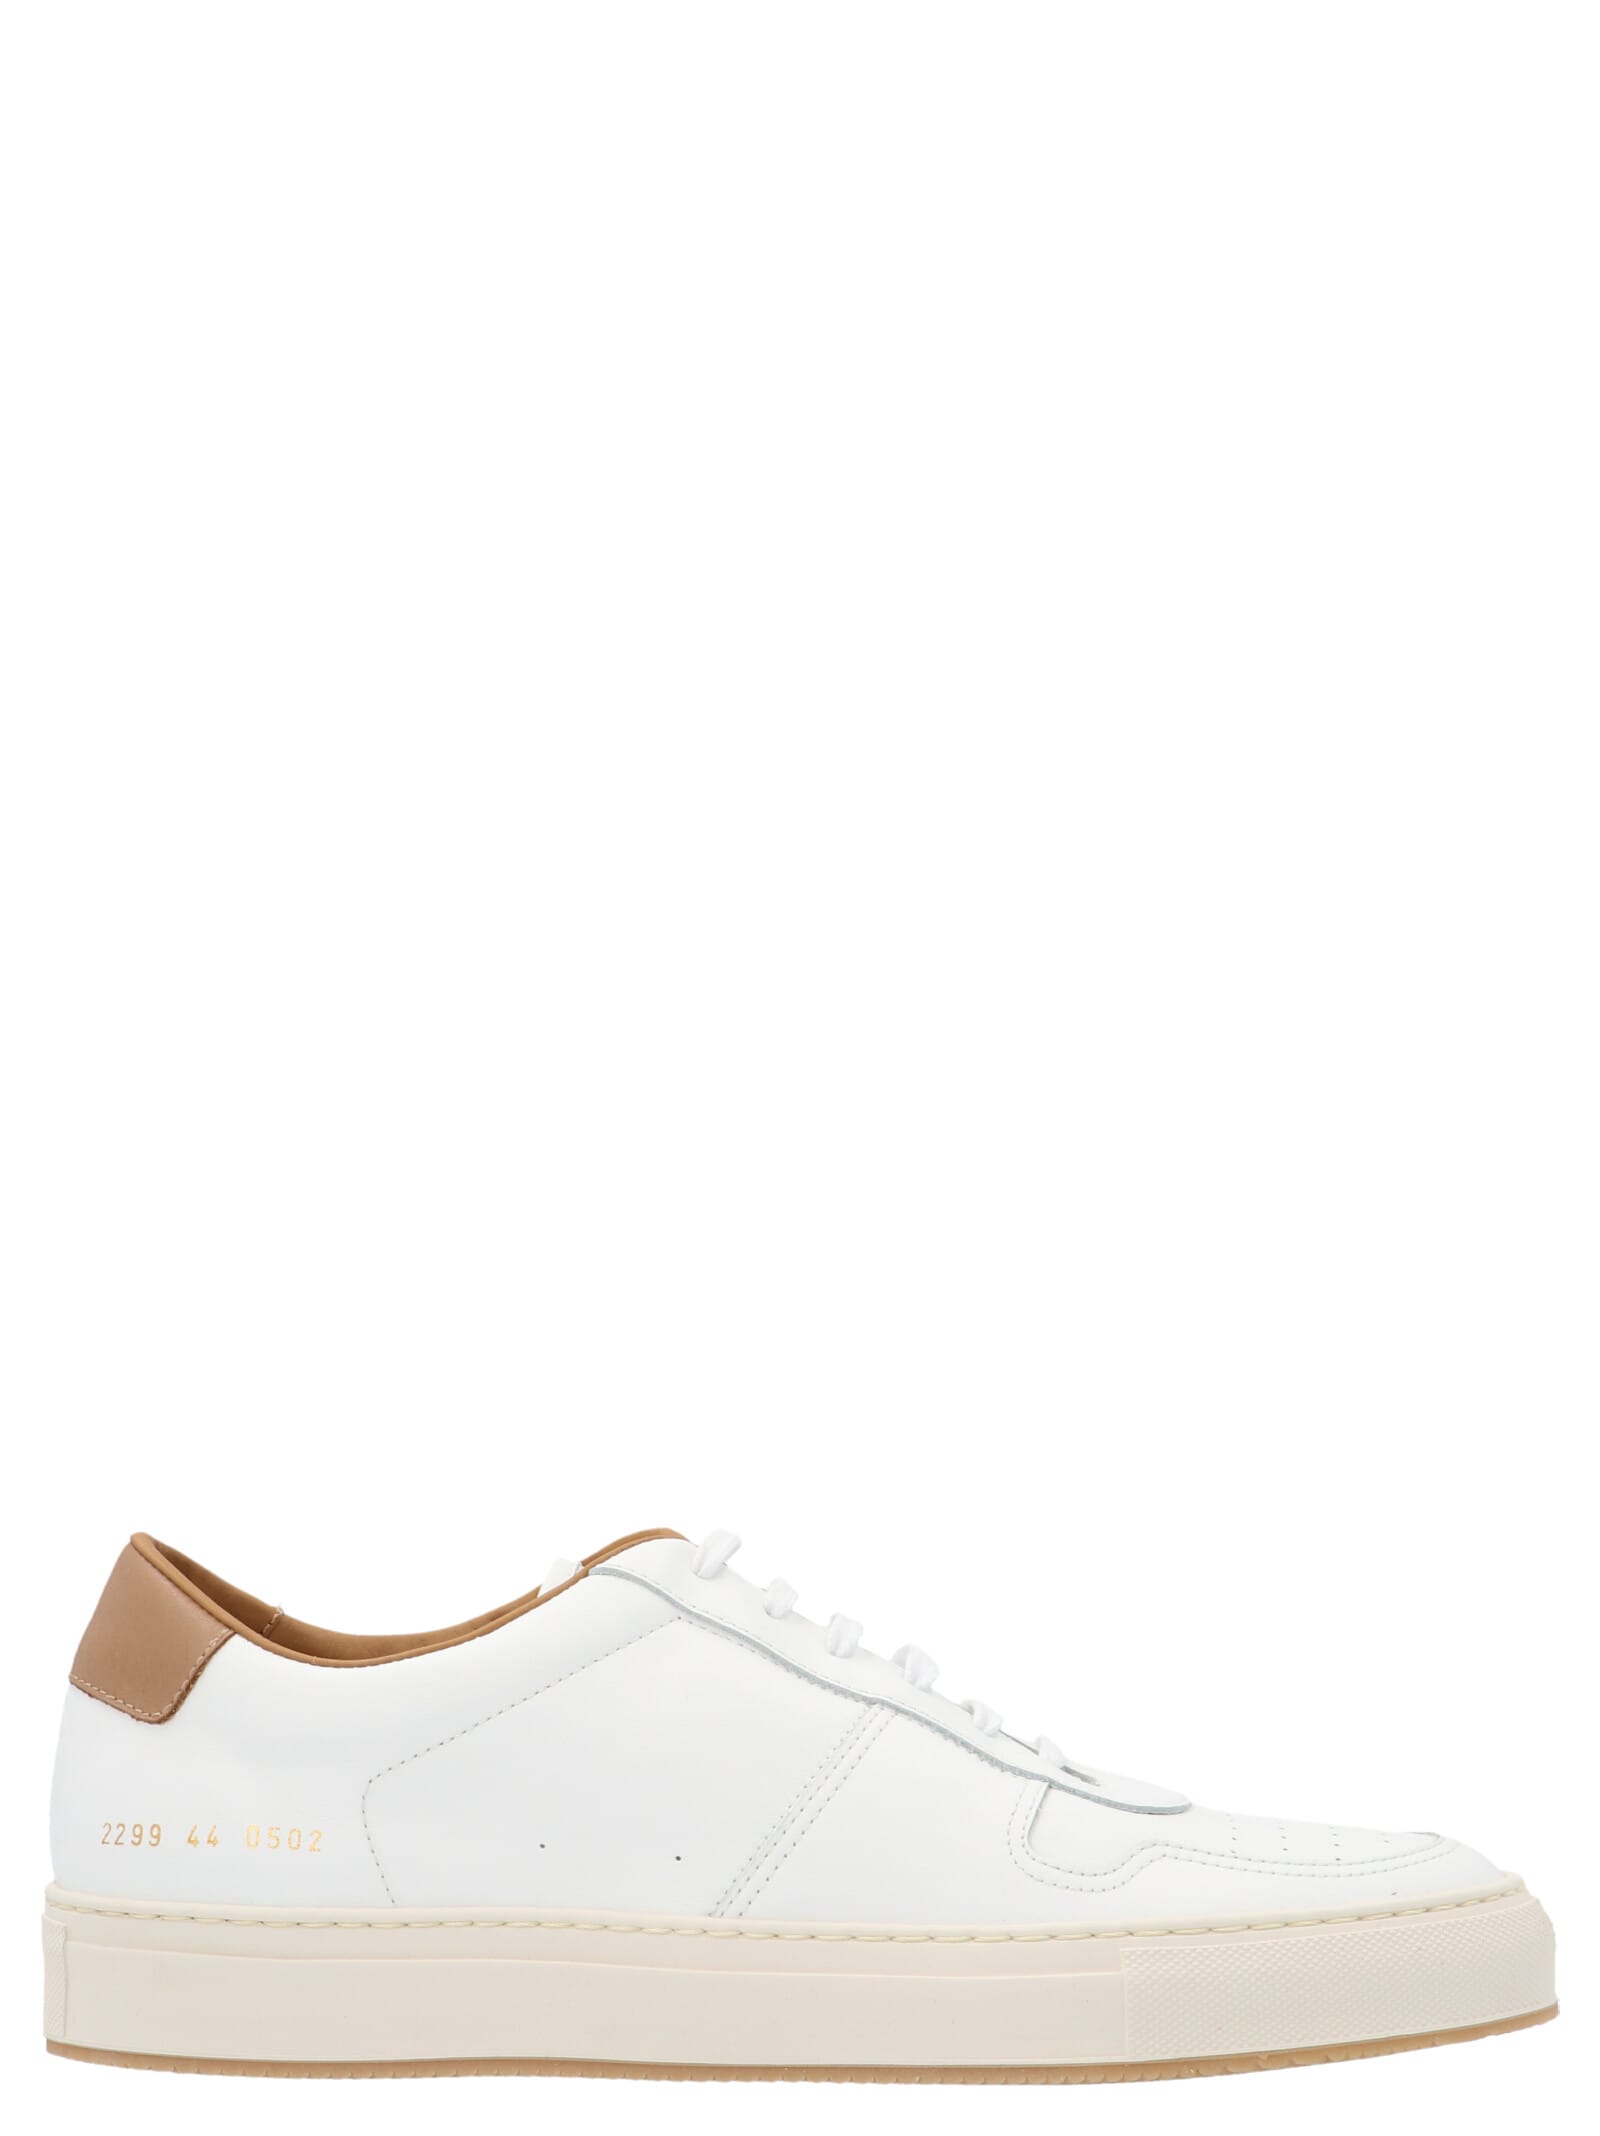 Common Projects bball 90 Shoes